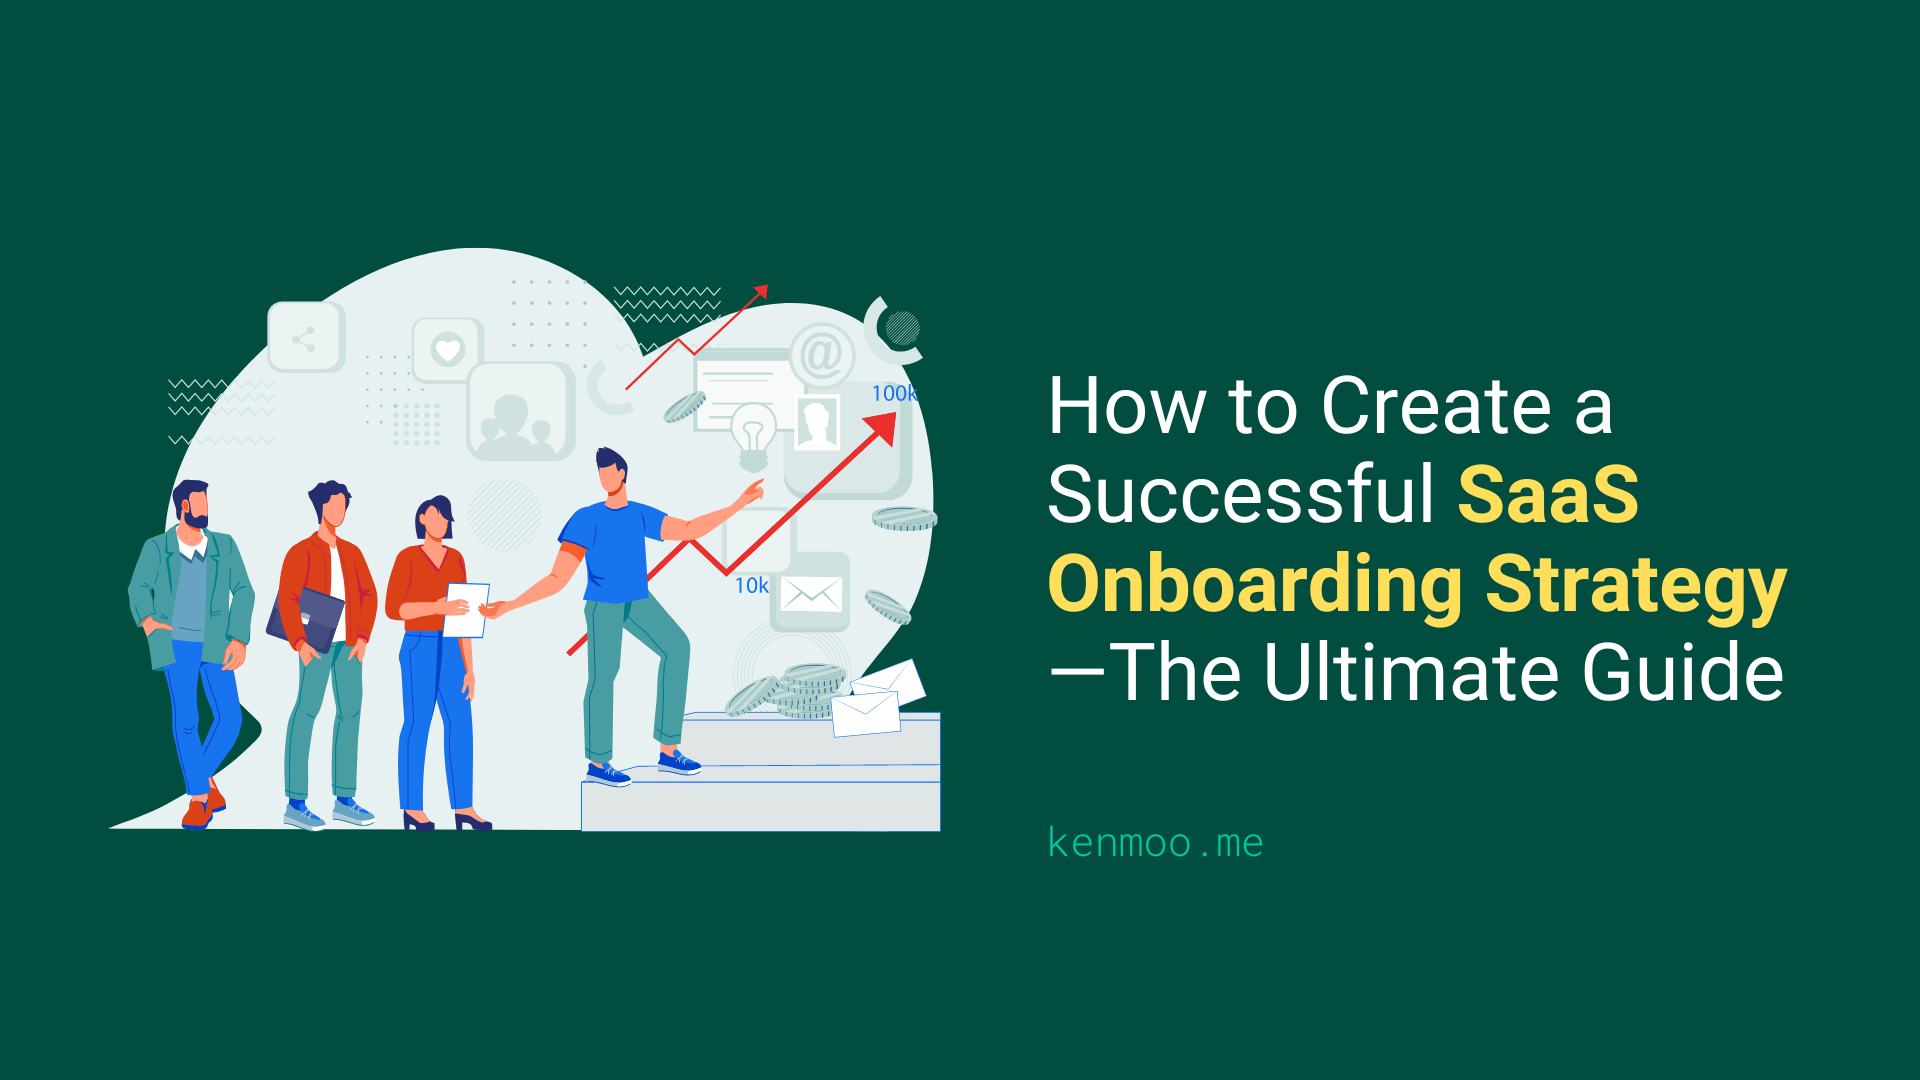 How to Create a Successful SaaS Onboarding Strategy—The Ultimate Guide